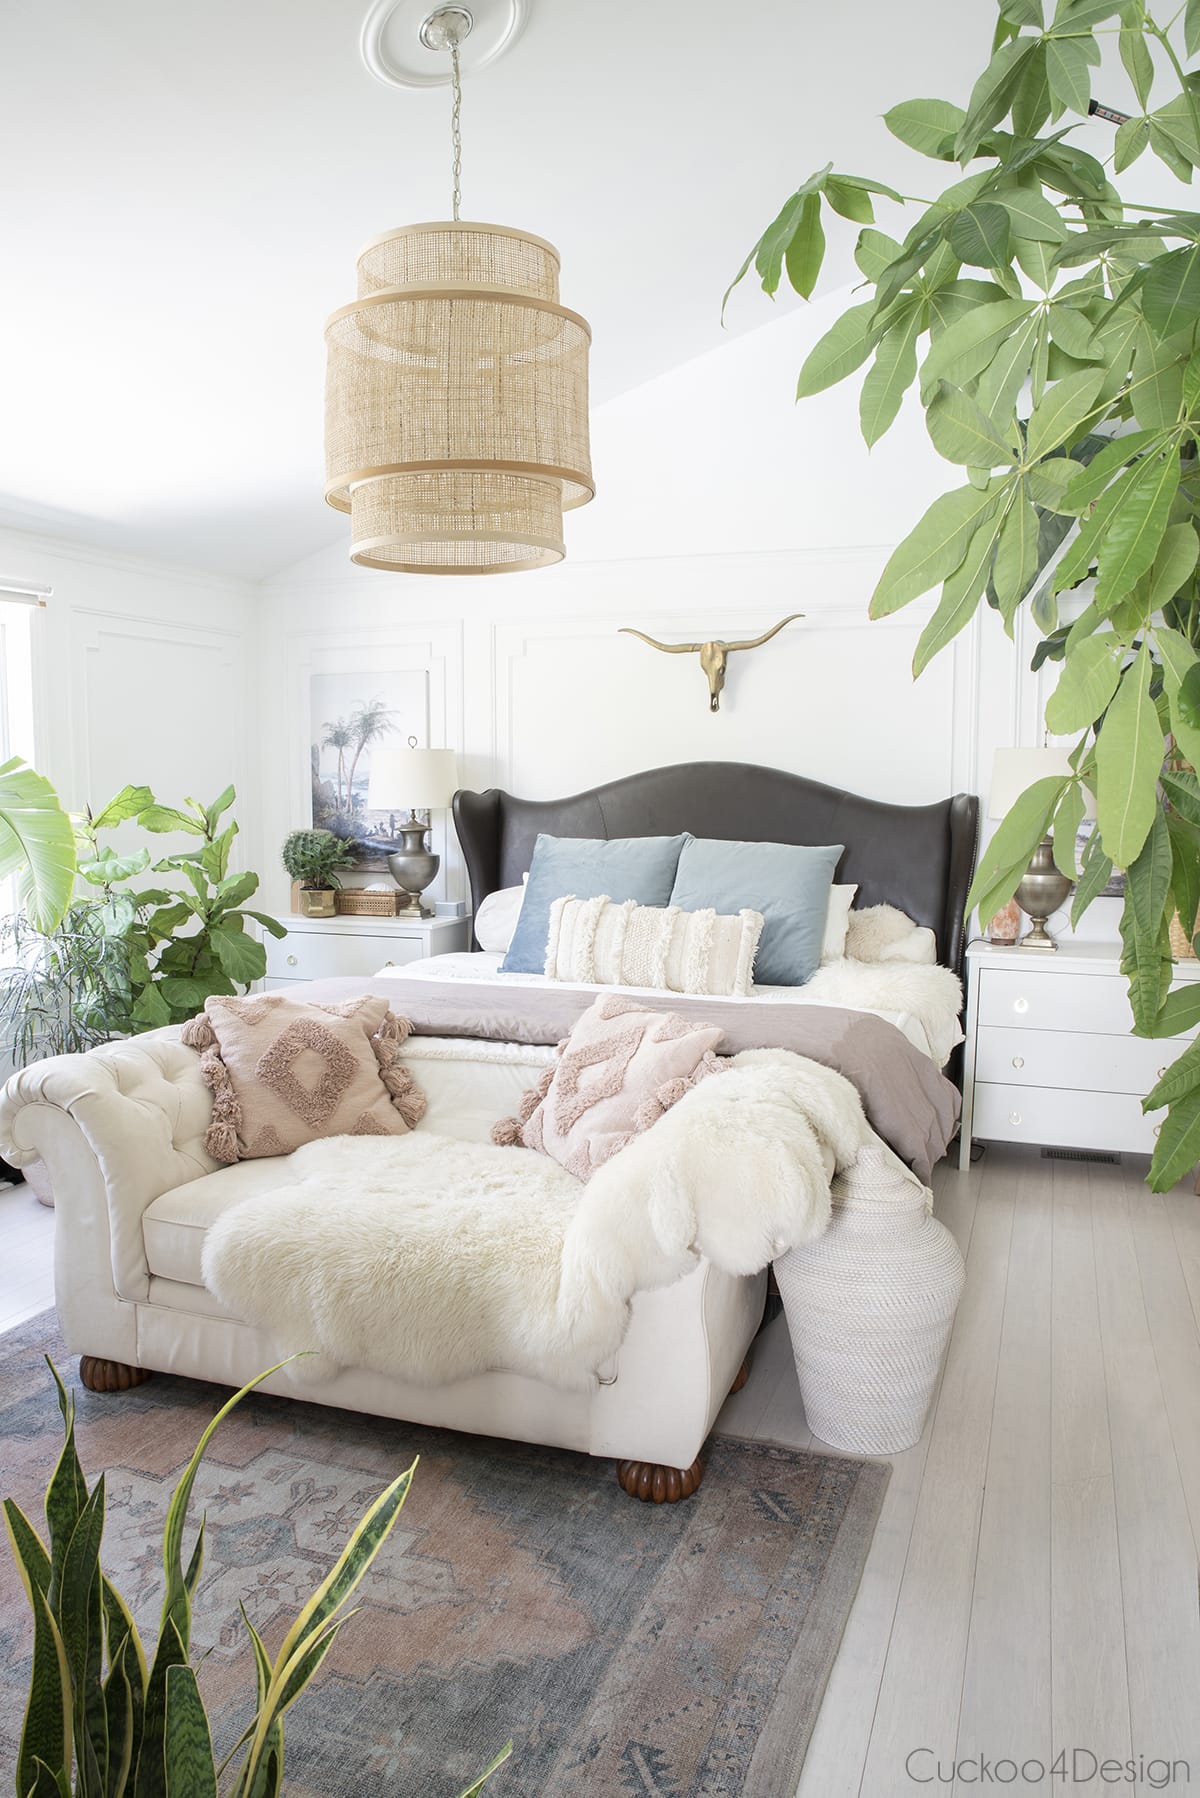 boho bedroom in neutrals, blush tones and blue accents with large cane pendant light